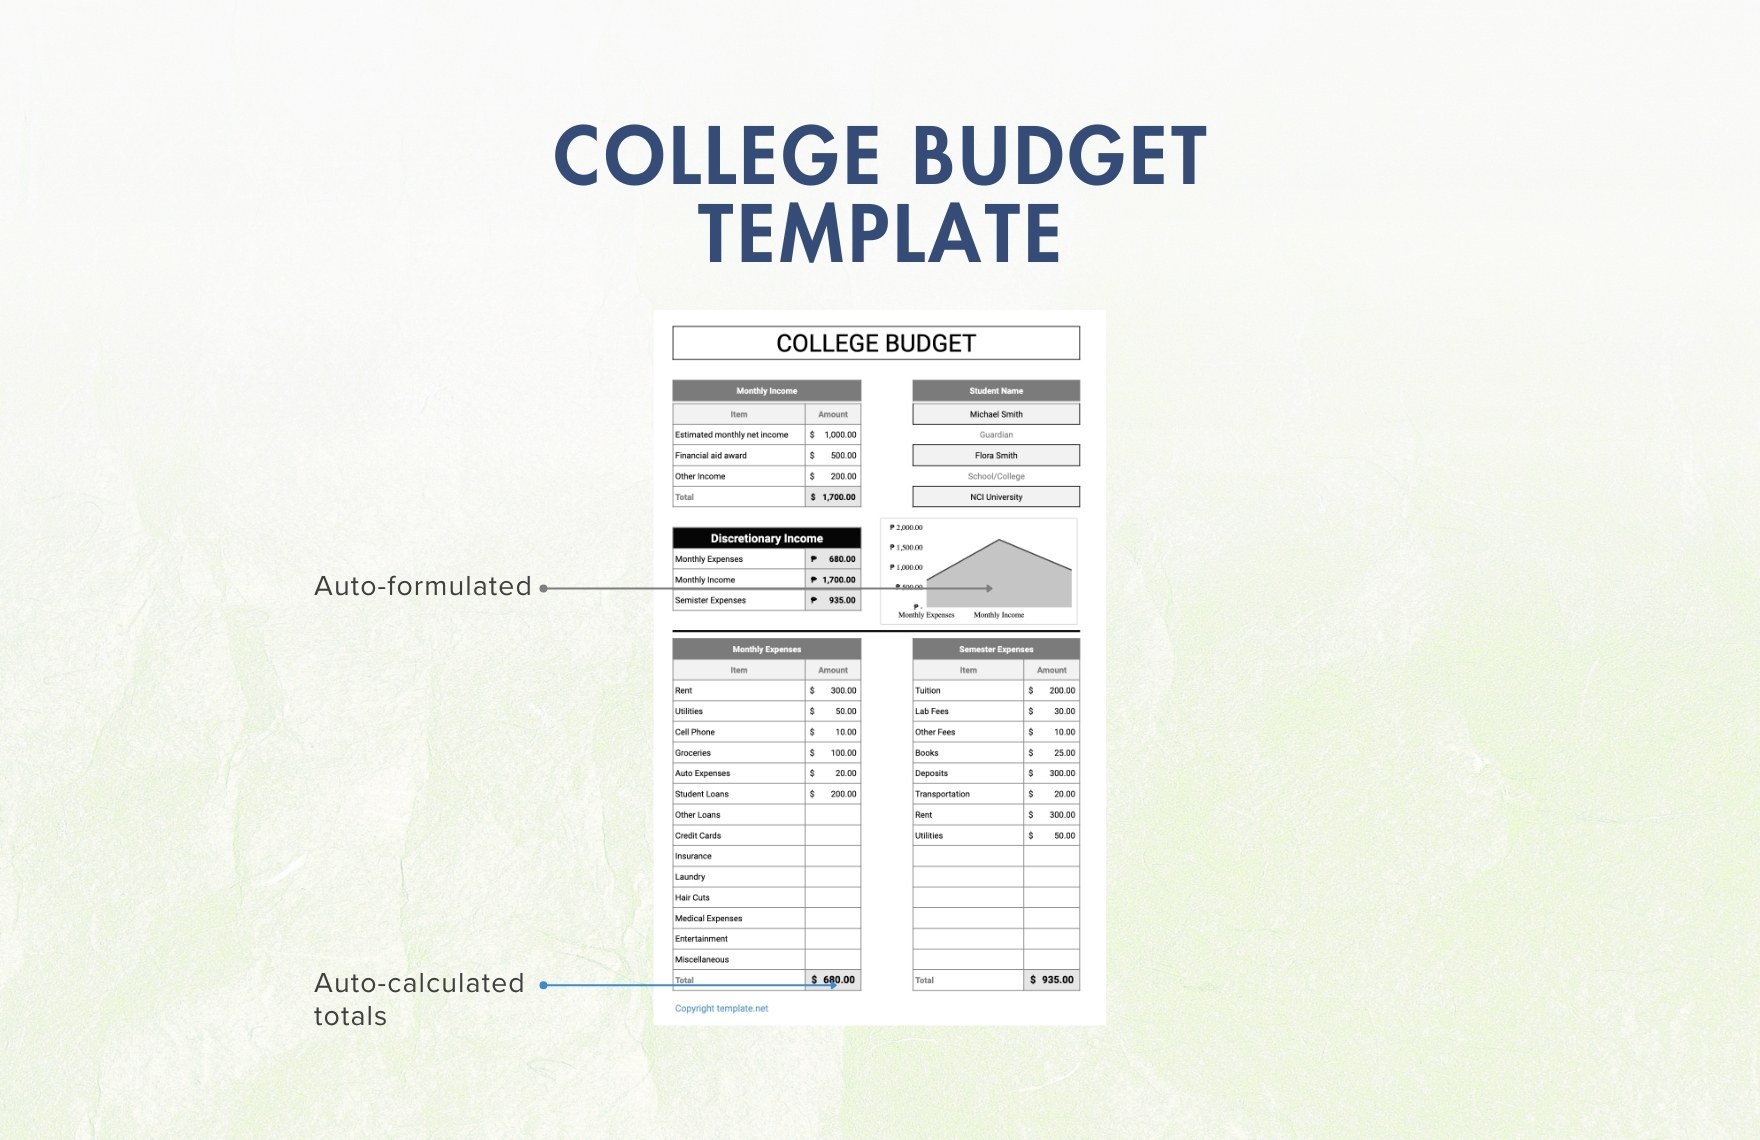 Sample College Budget Template